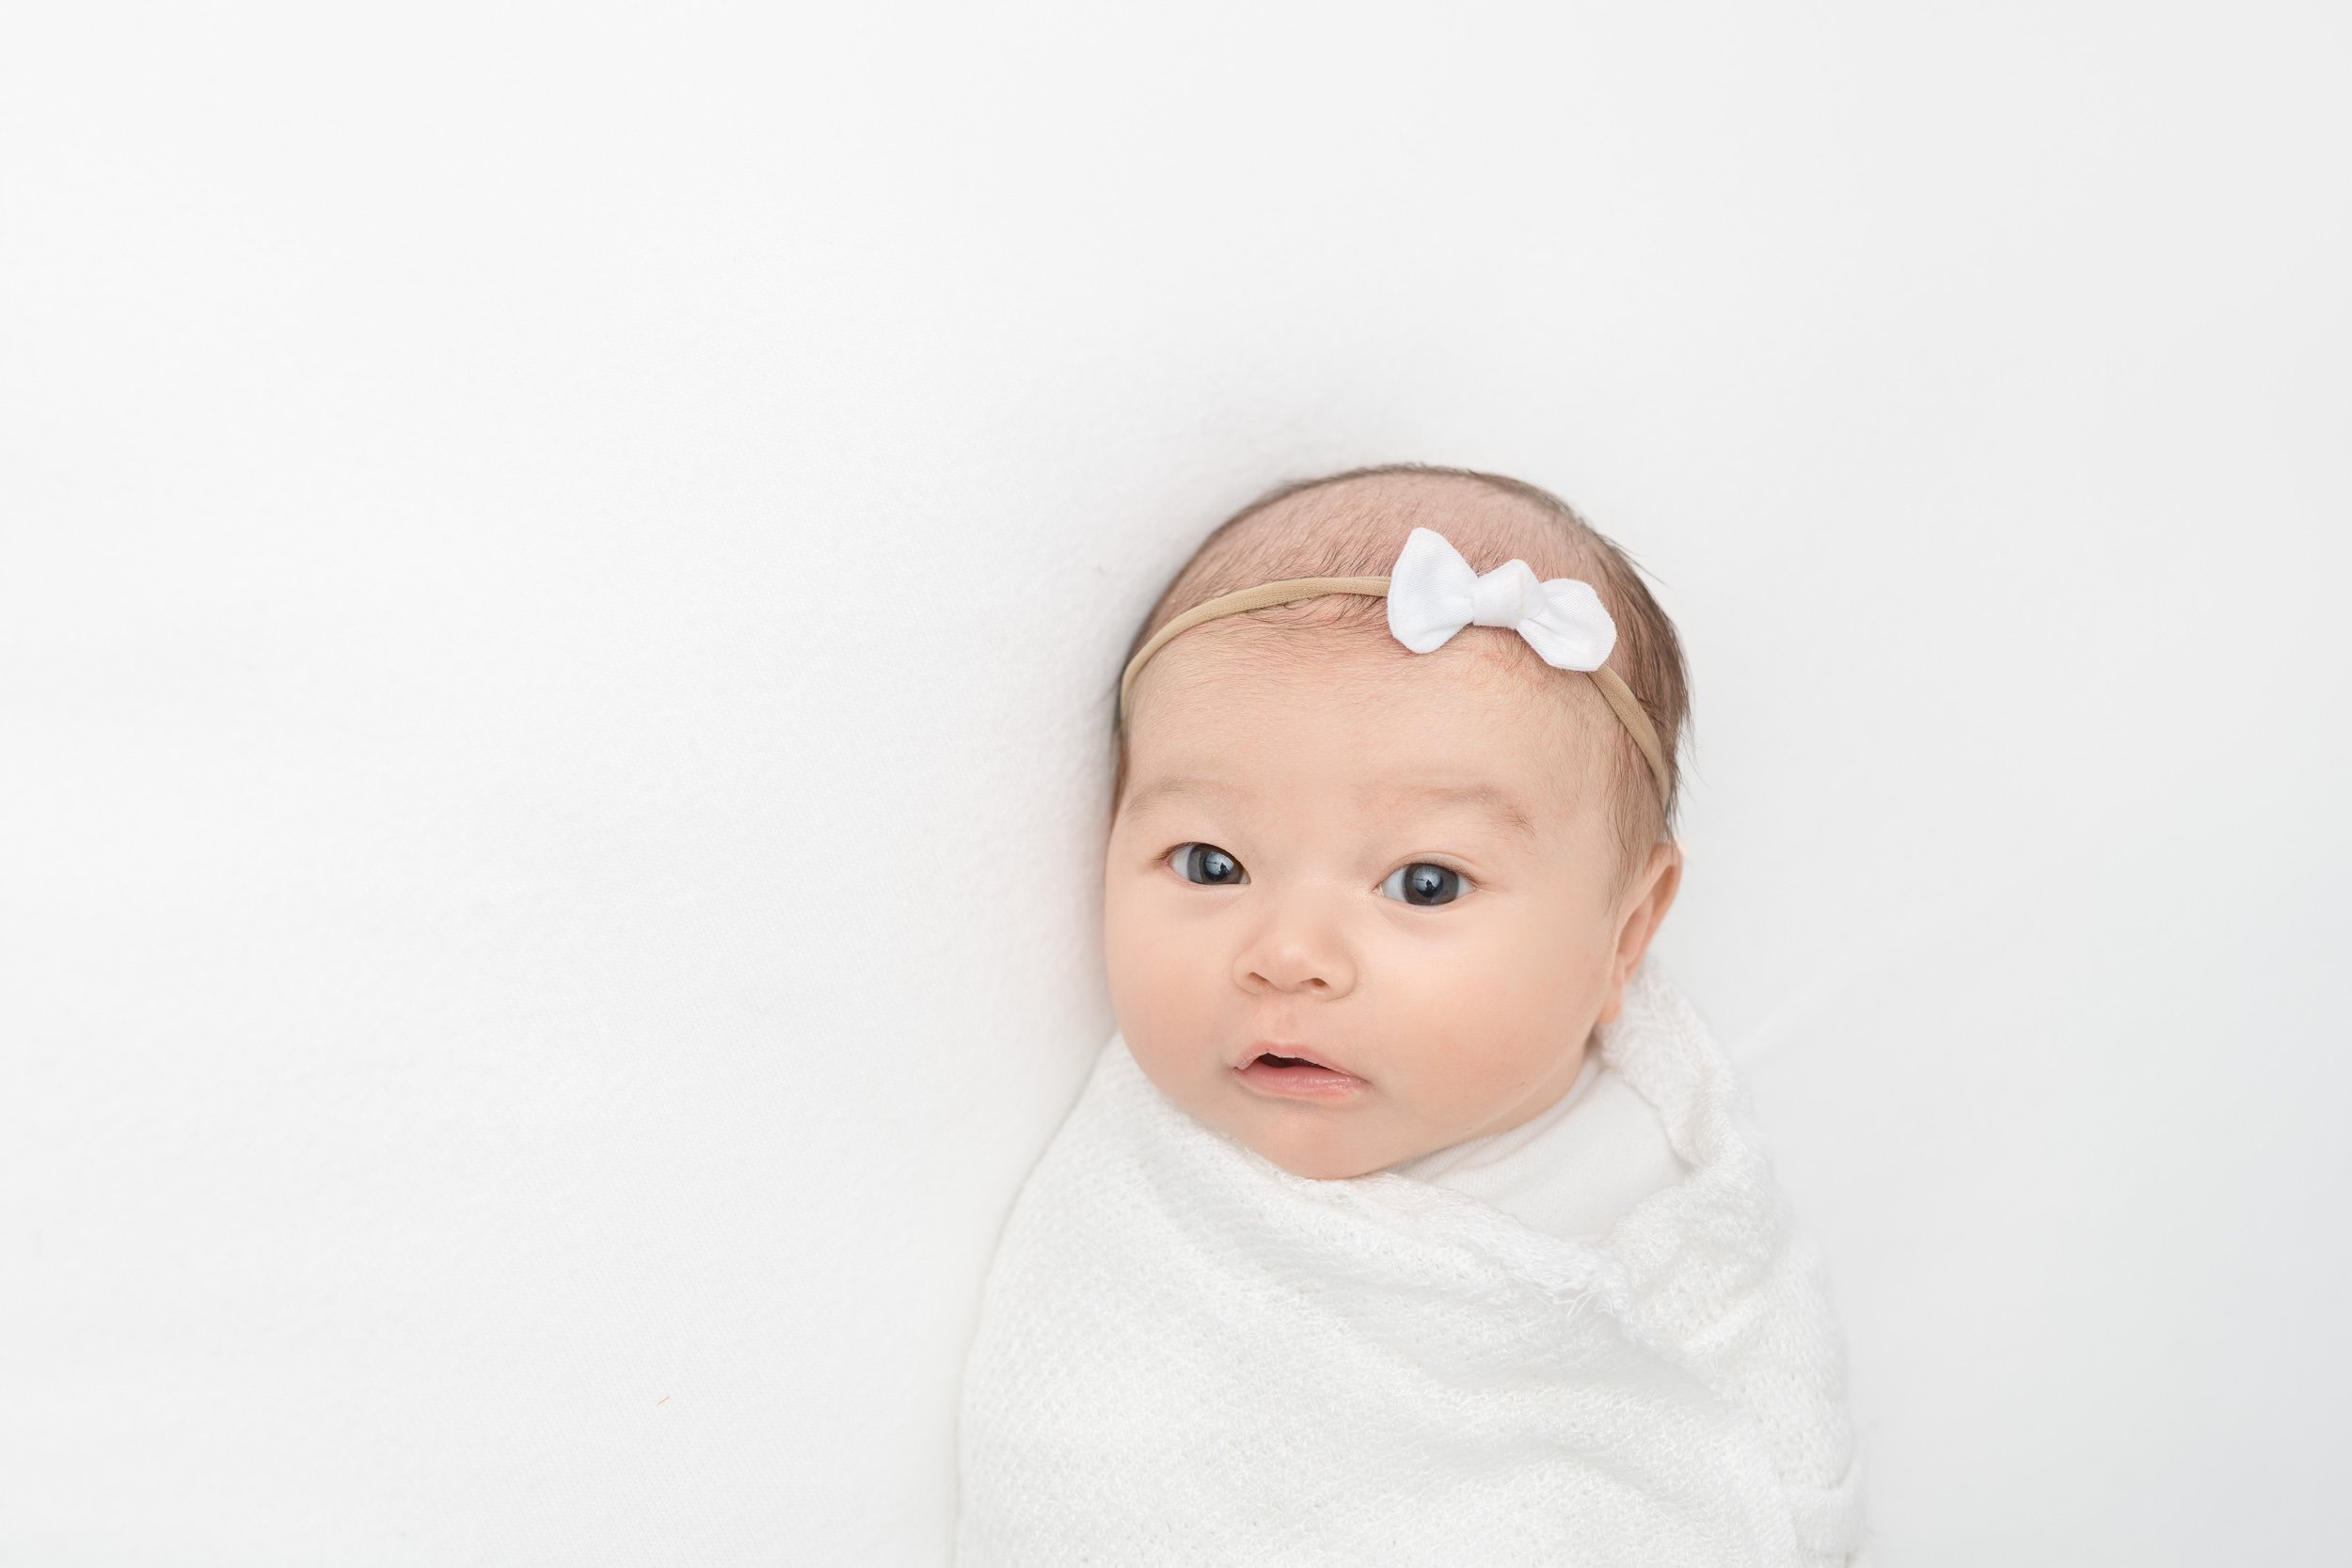  A baby swaddled in white wearing a bow was captured in a studio in Maplewood by Nicole Hawkins Photography. baby girl swaddle in white #NicoleHawkinsPhotography #studionewbornportraits #NJstudiophotographer #NJnewborns #NicoleHawkinsNewborns 